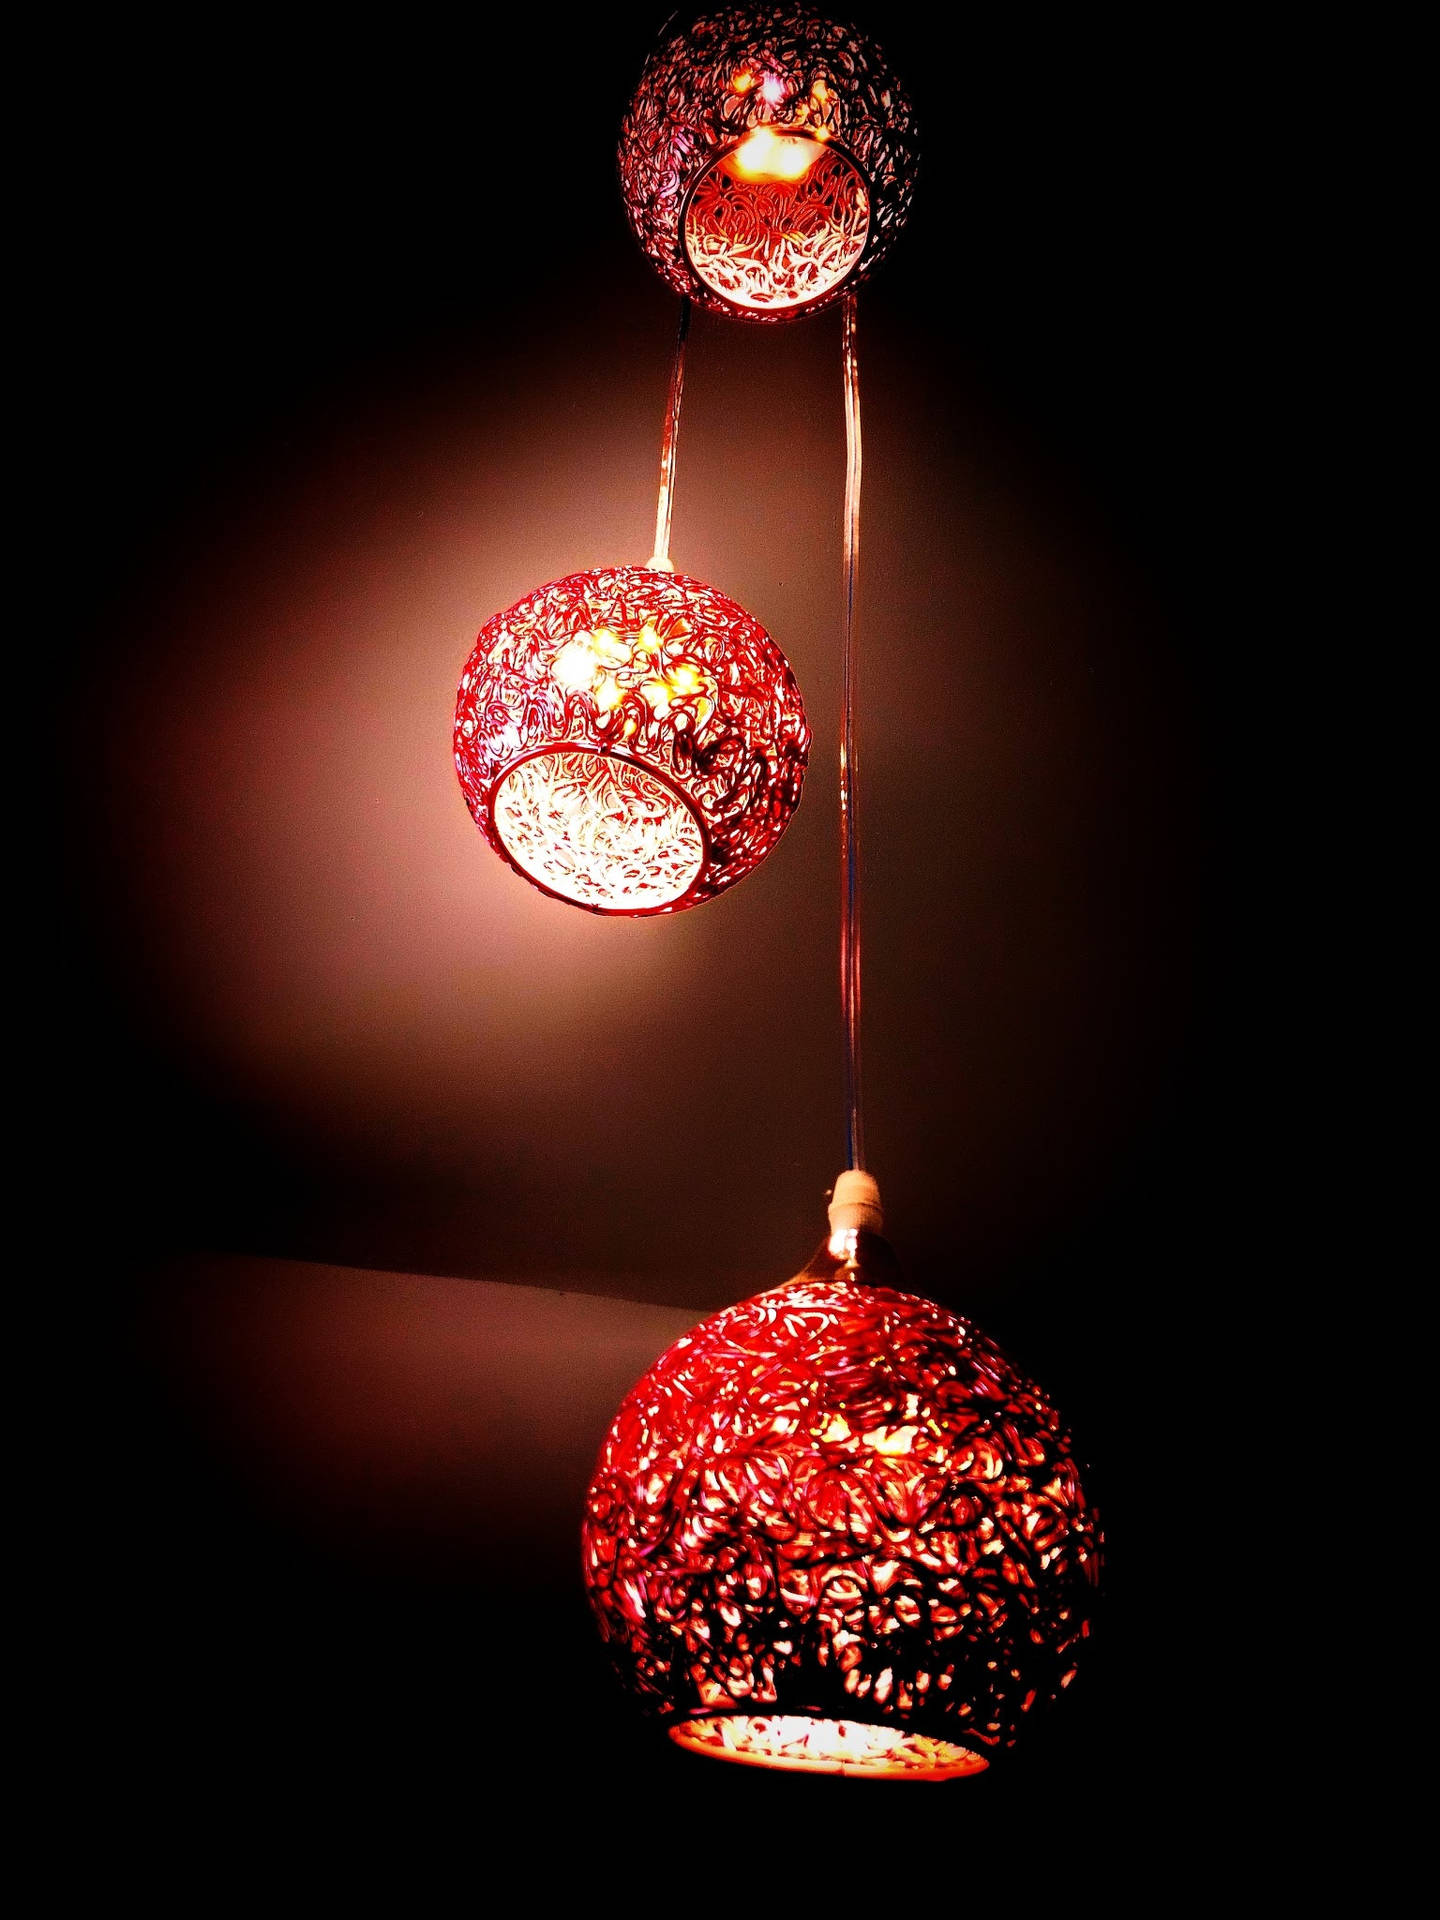 Dark Red Ceiling Lamps Background